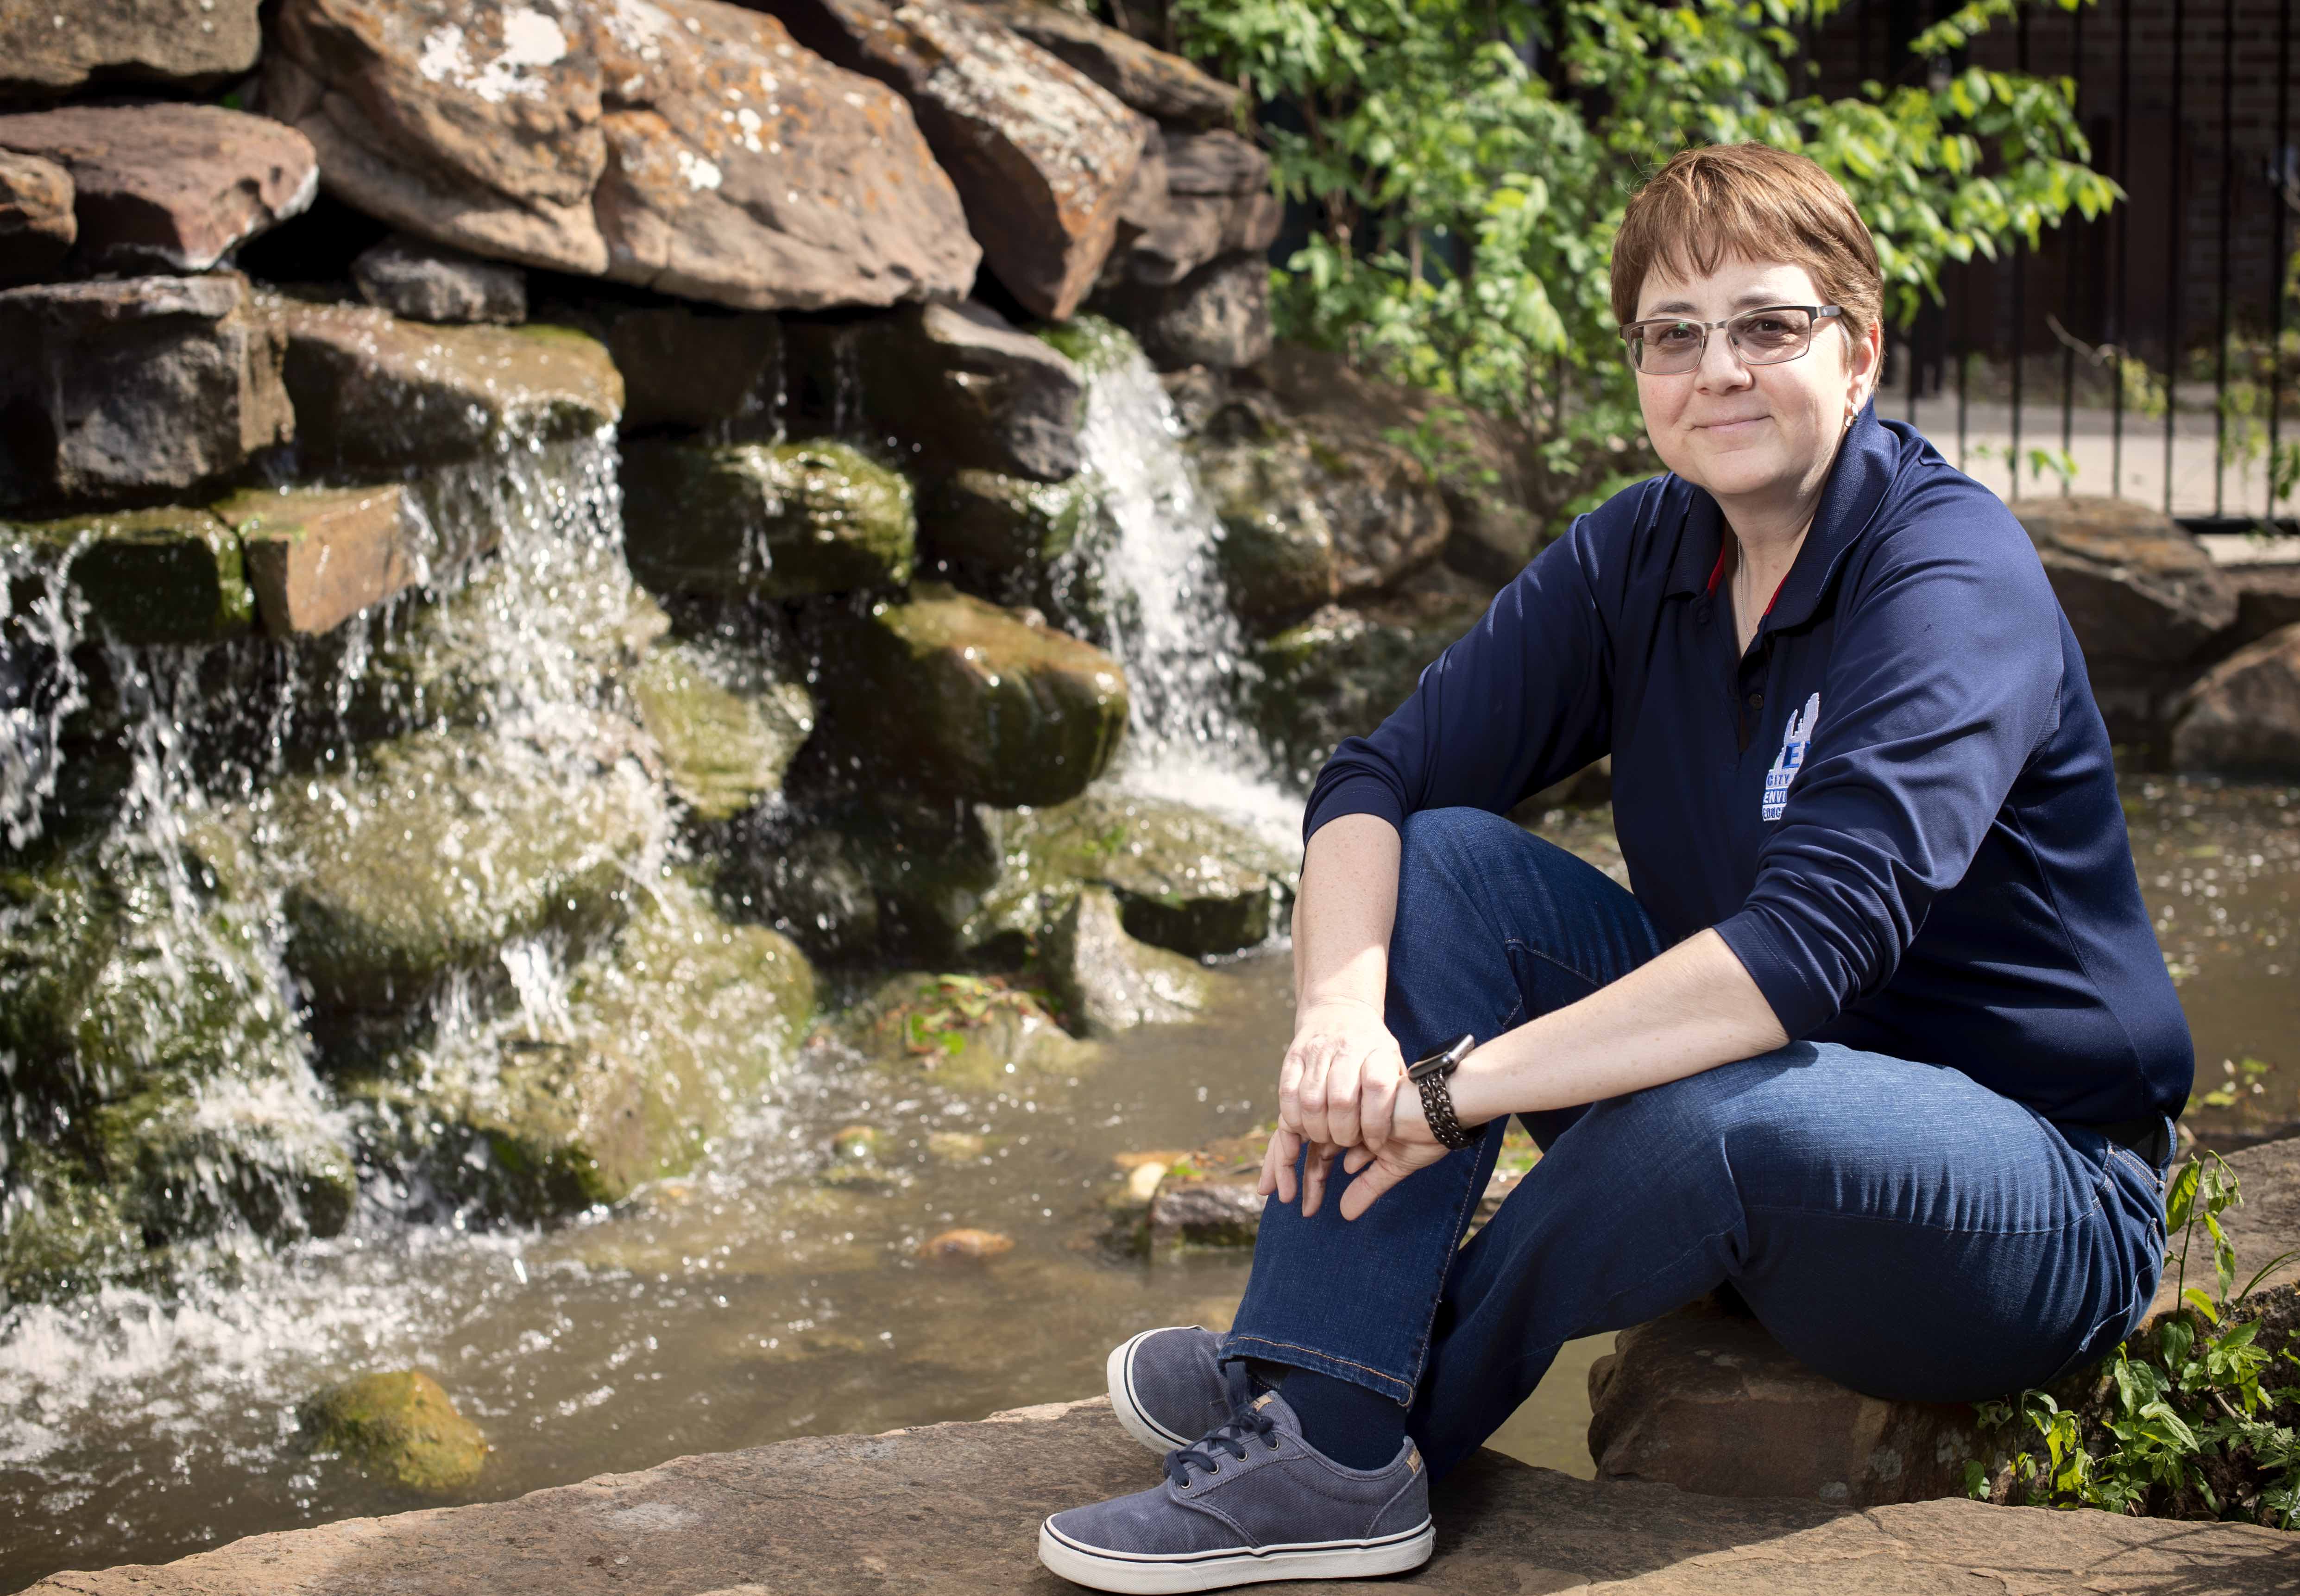 Thompson is pictured next to a small waterfall at at the Elm Fork Education Center at UNT.